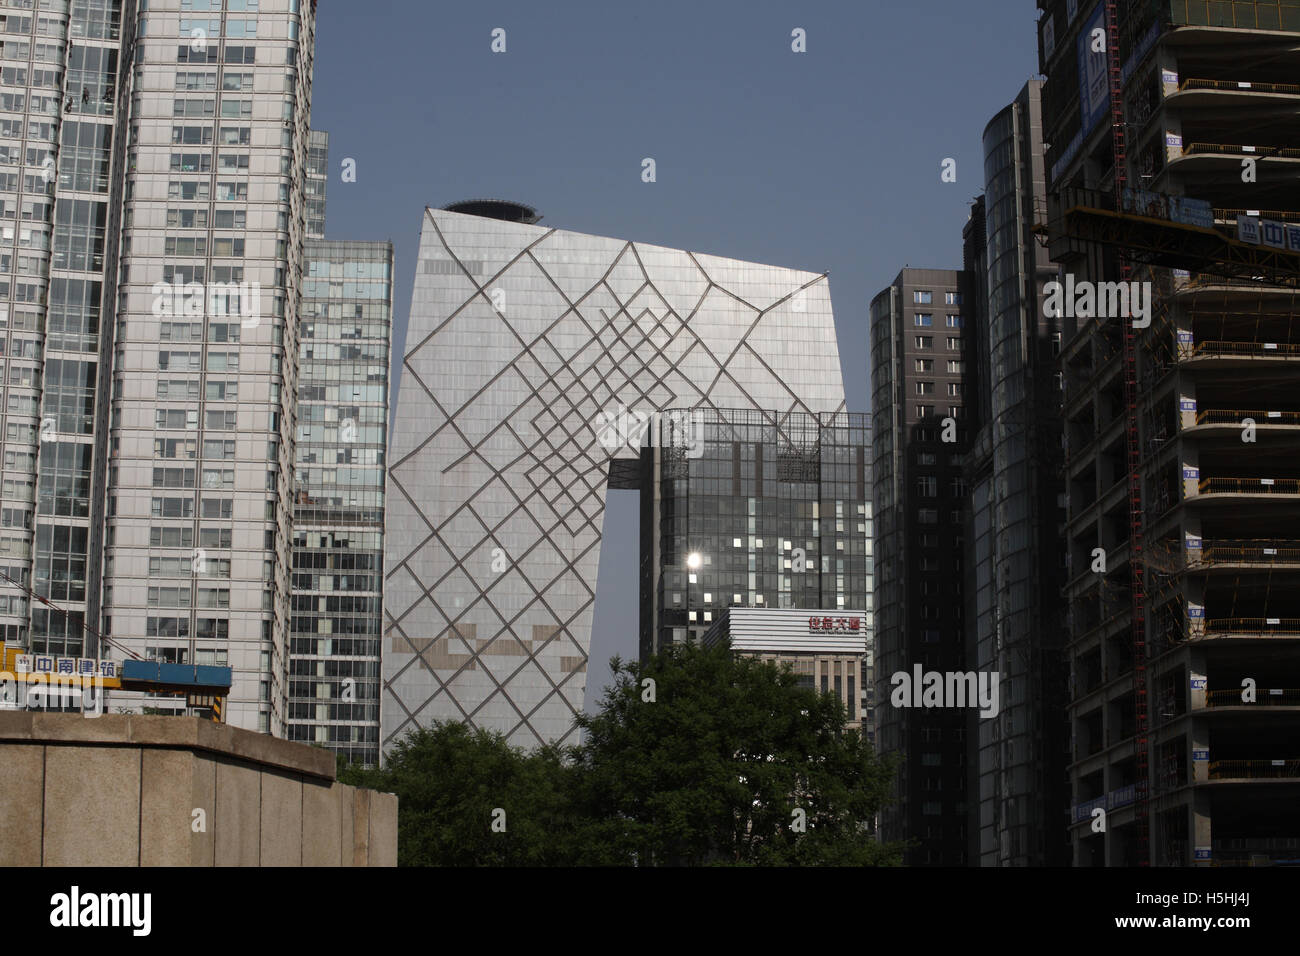 CCTV of China, a modern building that looks like a gate, it was designed by the Dutch architect Rem Koolhaas. Beijing, China. Stock Photo